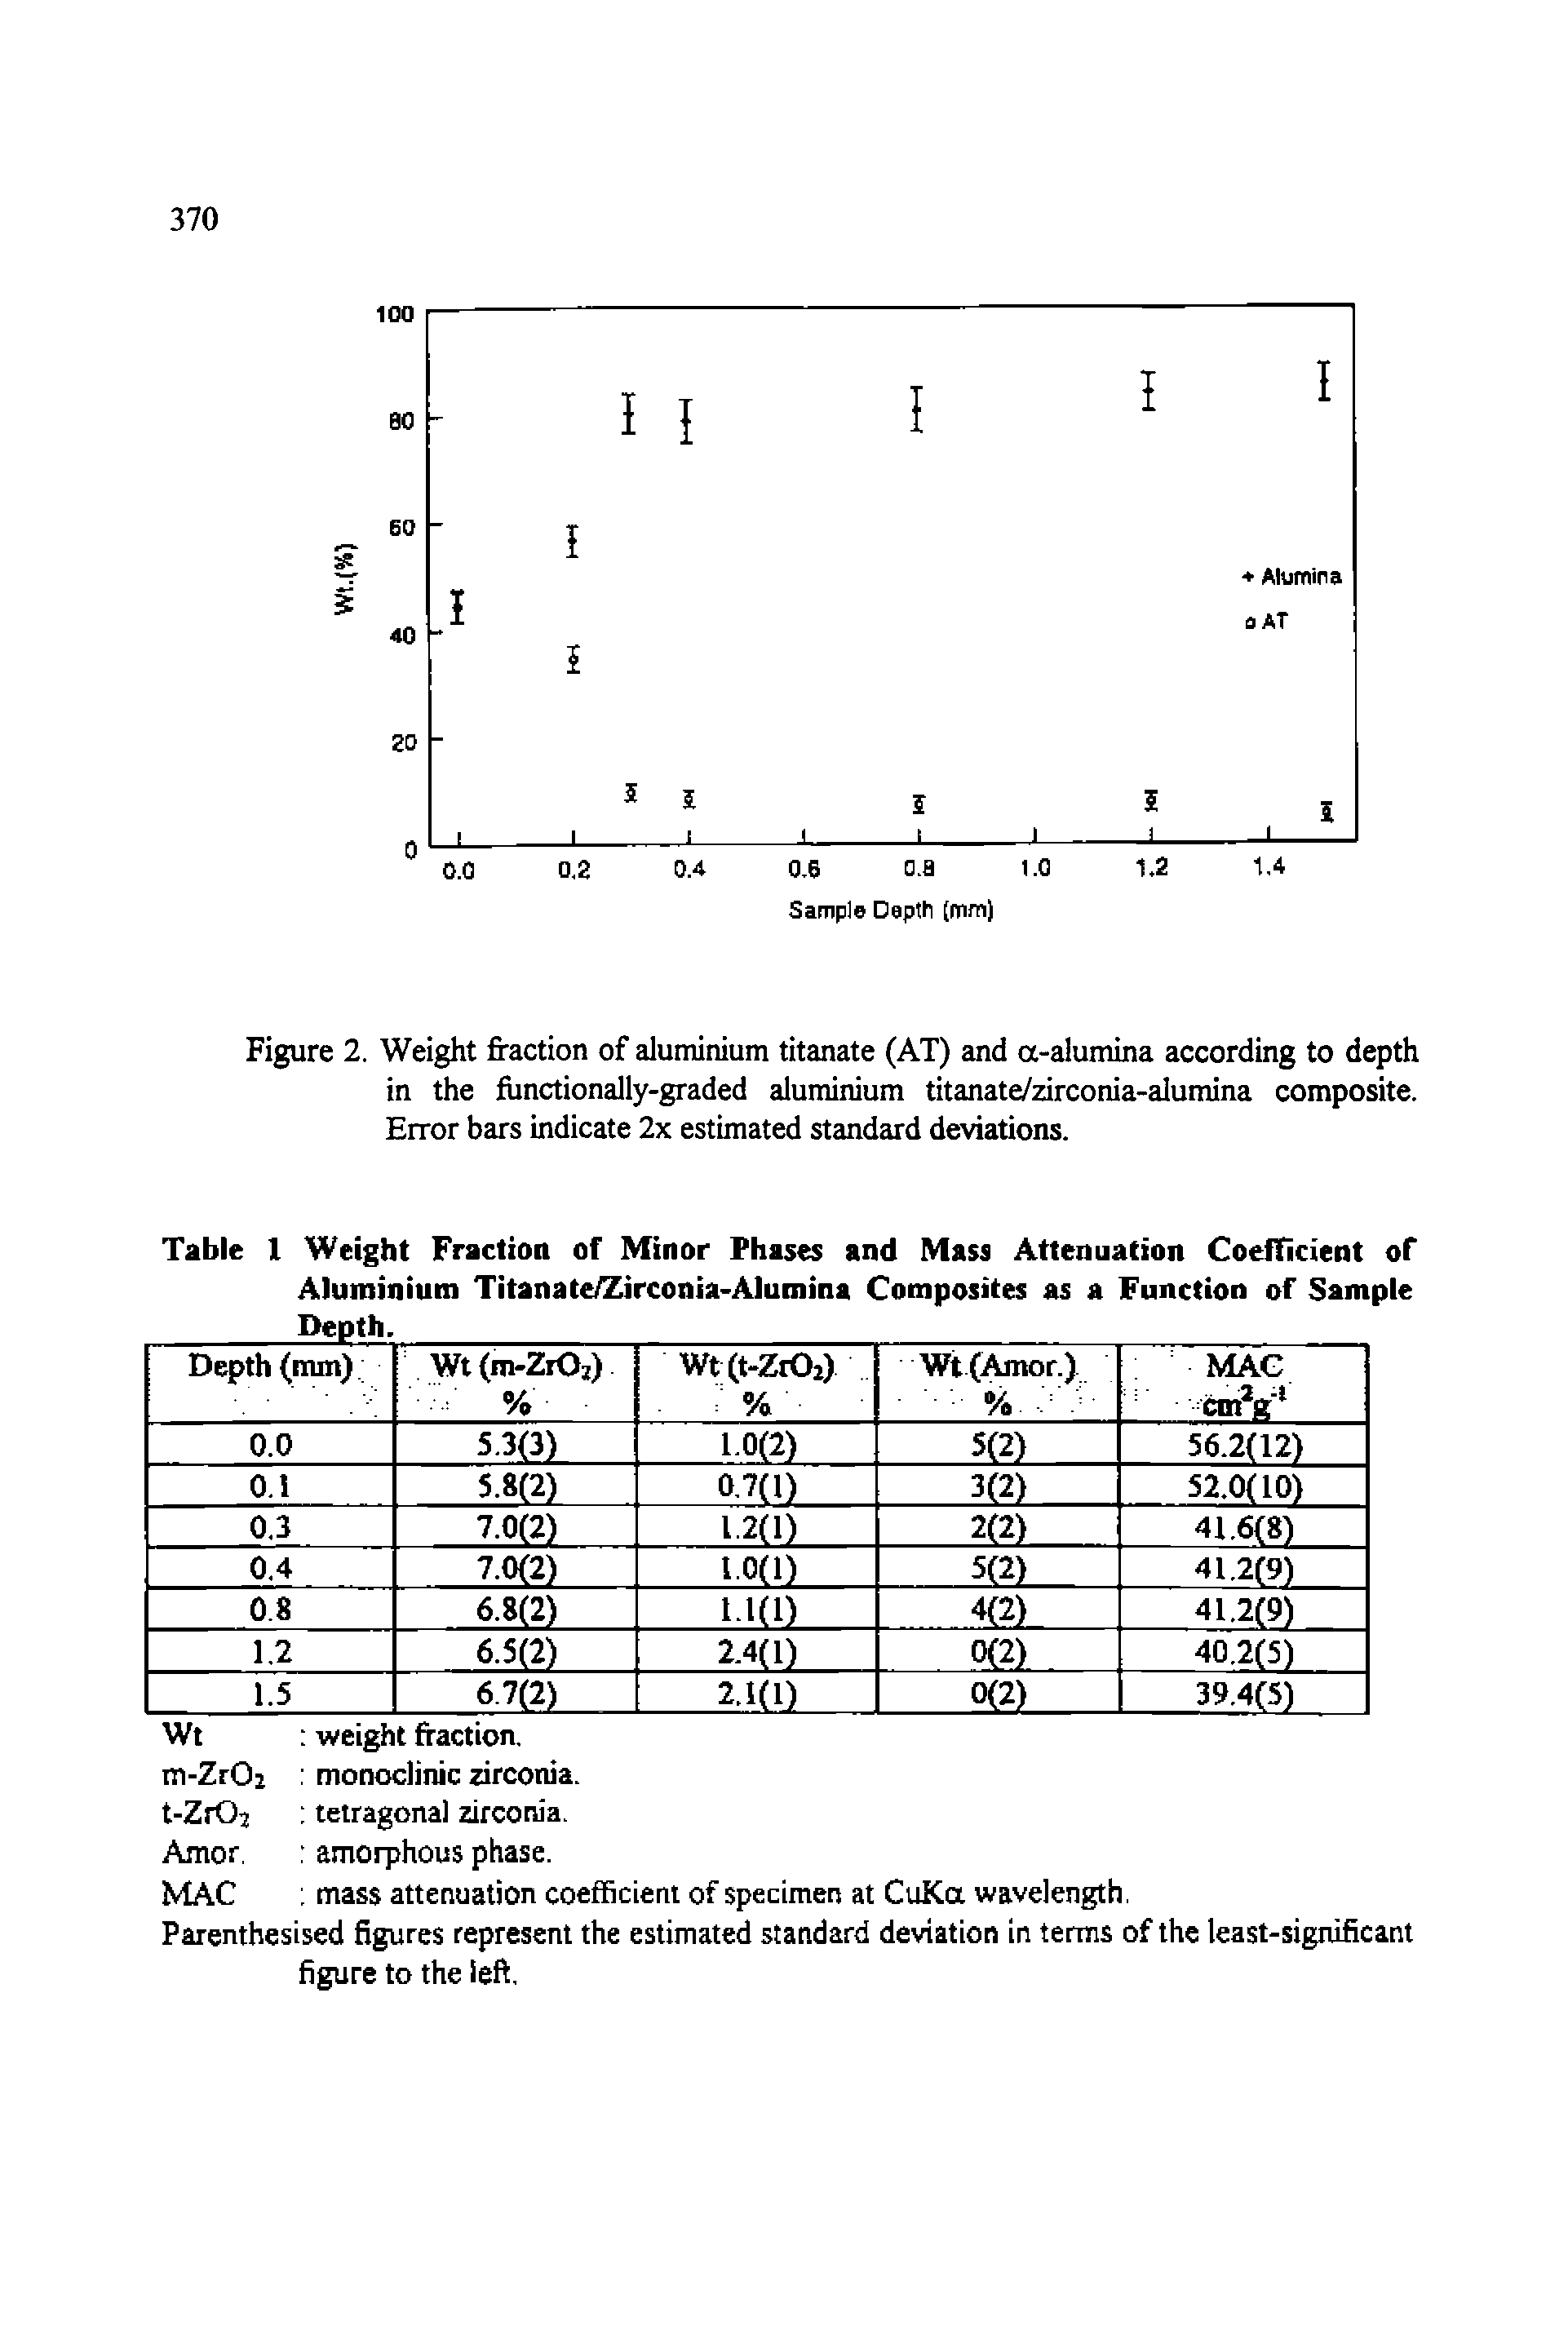 Table 1 Weight Fraction of Minor Phases and Mass Attenuation Coefficient of Aluminium Titanate/Zirconia-Alumina Composites as a Function of Sample...